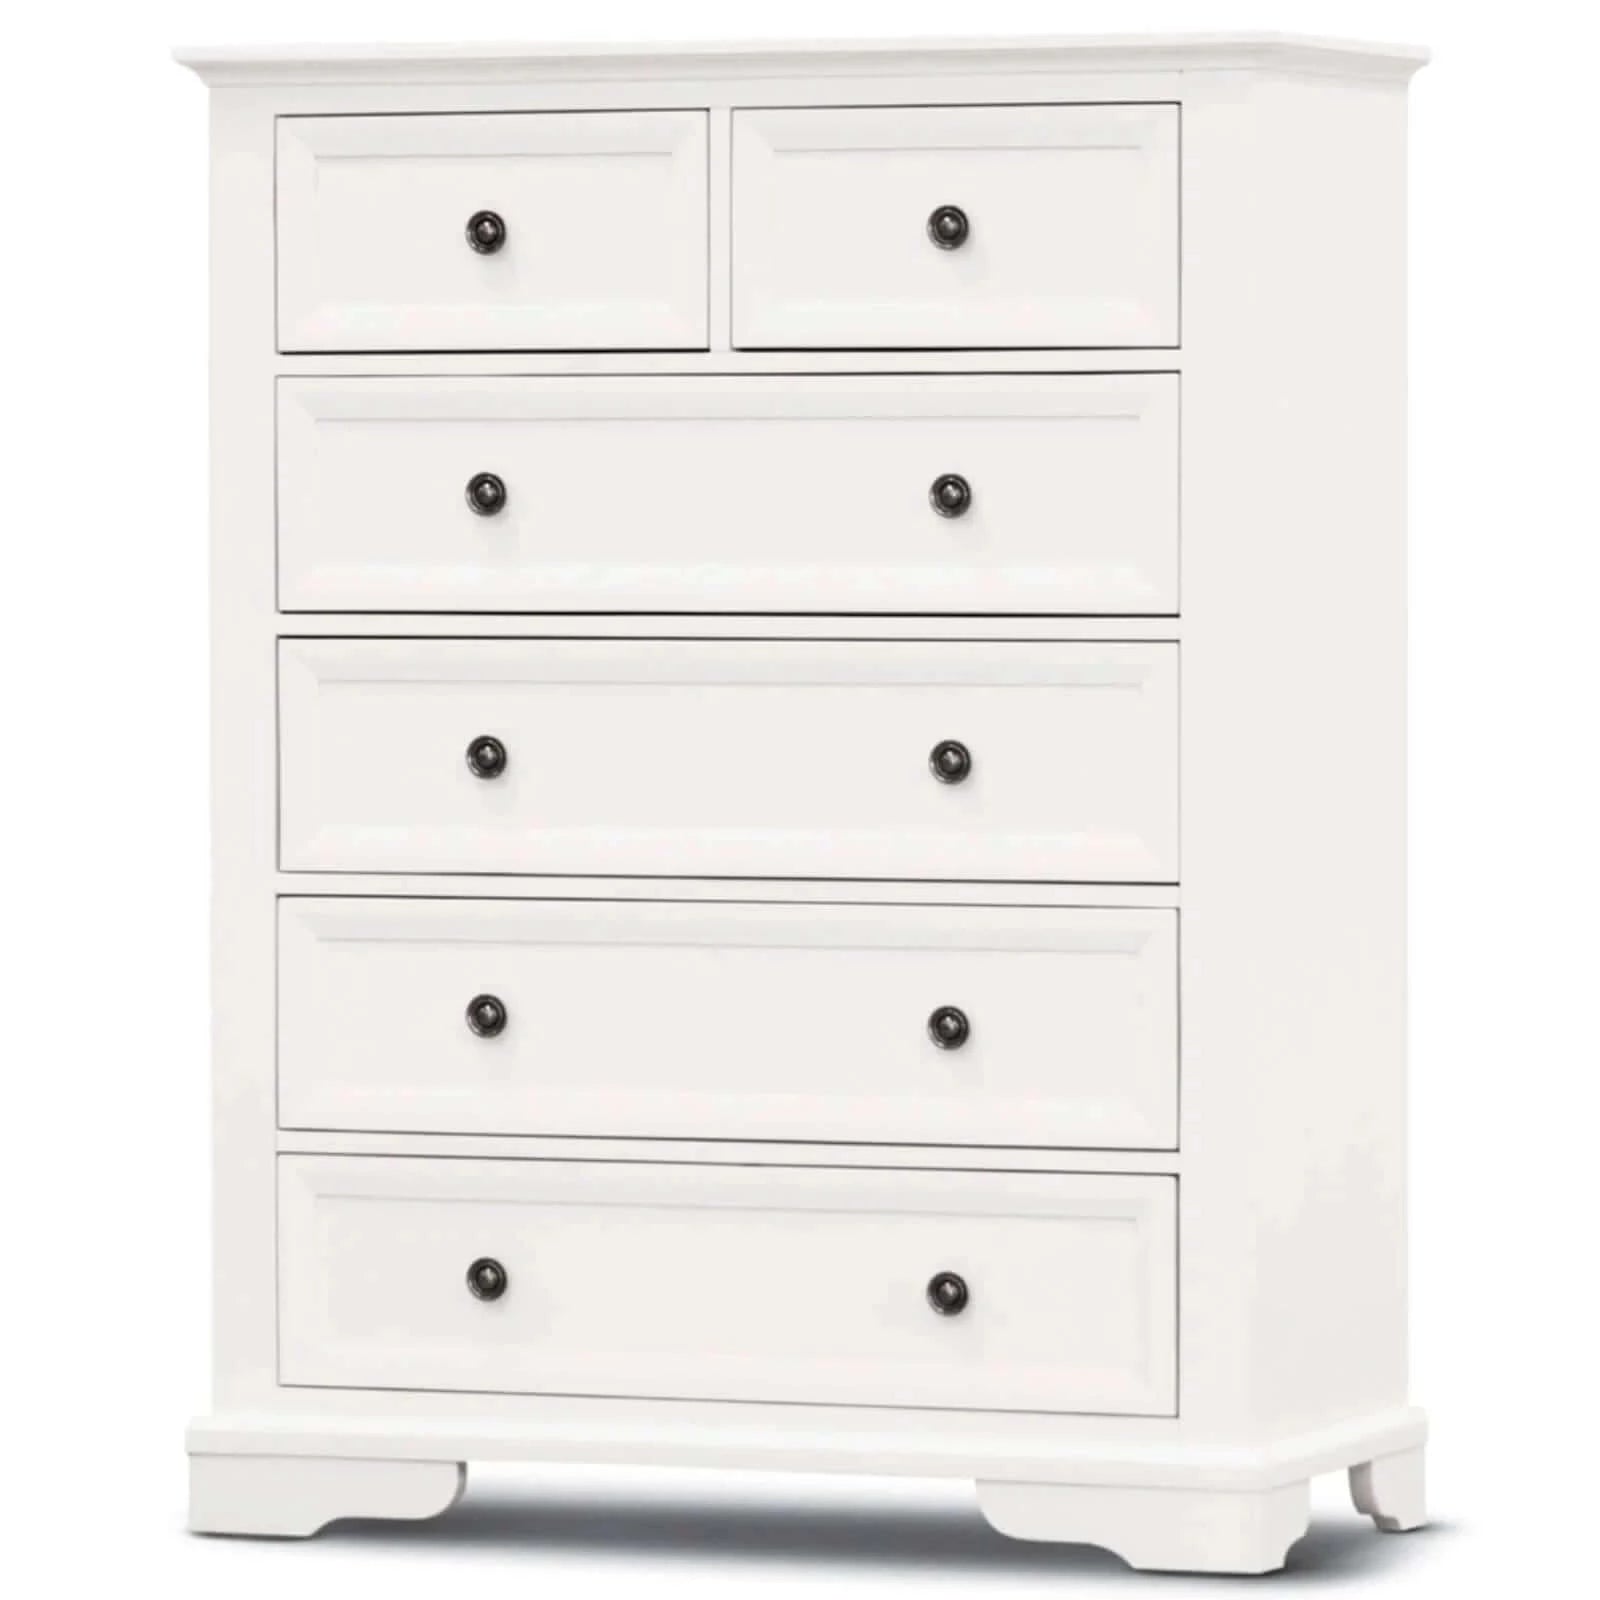 Buy celosia tallboy 6 chest of drawers solid acacia wood bed storage cabinet - white - upinteriors-Upinteriors